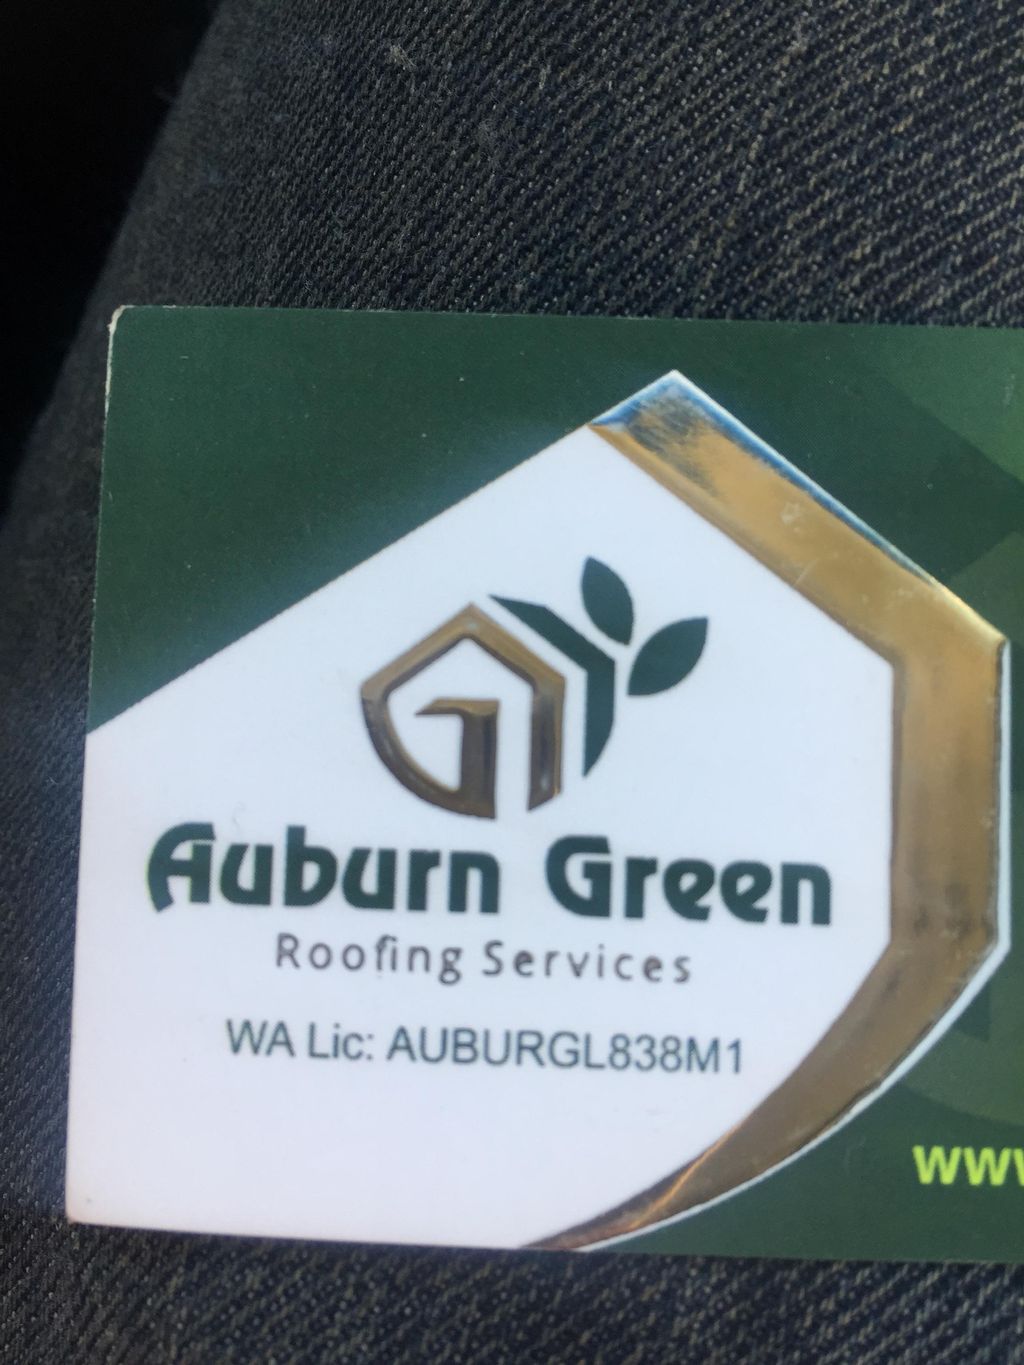 Auburn Green Roofing And Construction